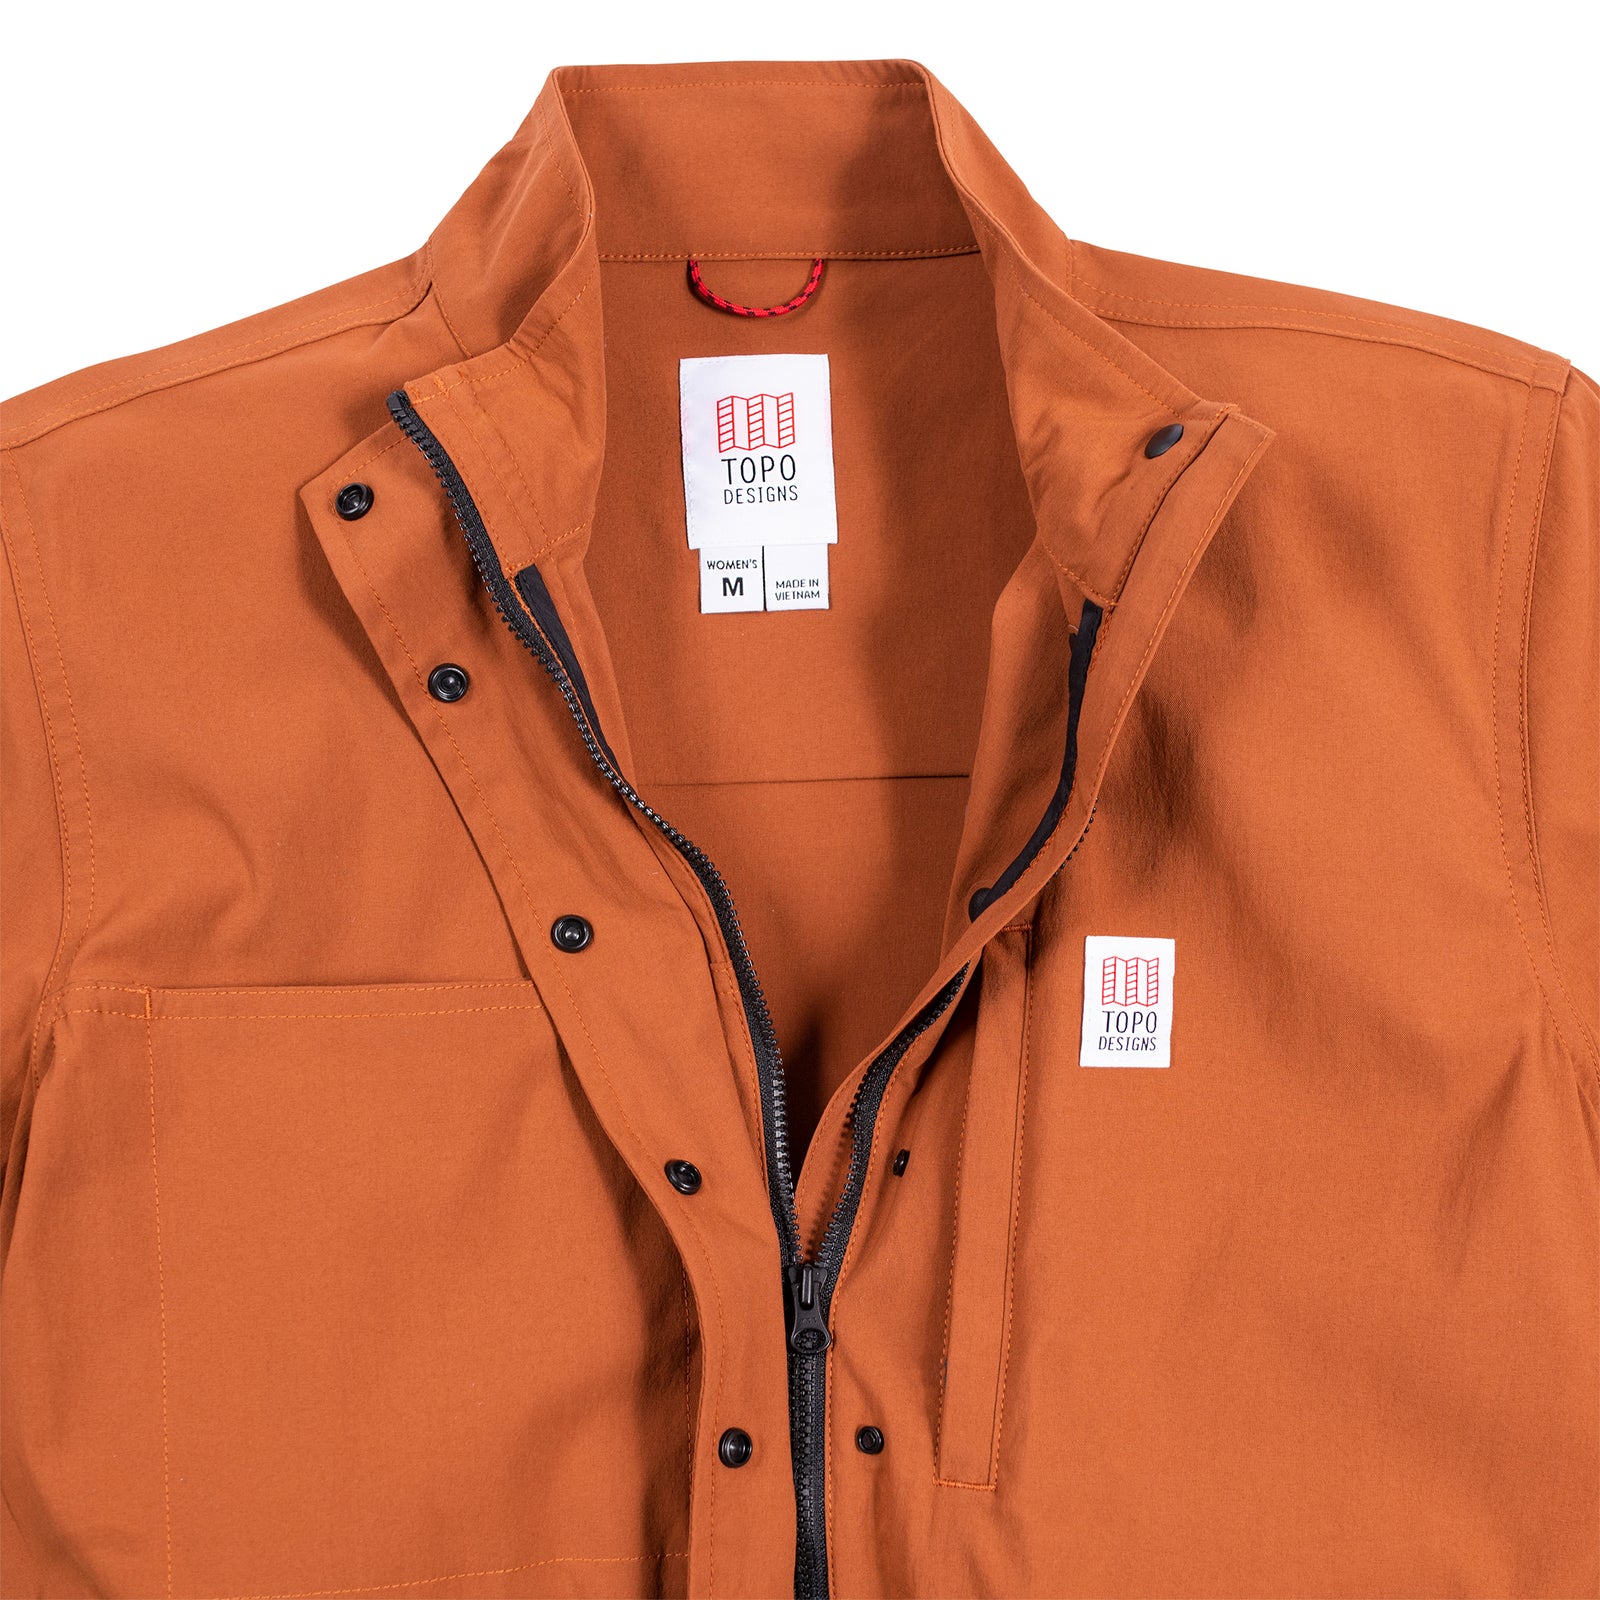 General detail shot of the Topo Designs Women's Coverall in Brick showing collar, front zipper, and snaps open.